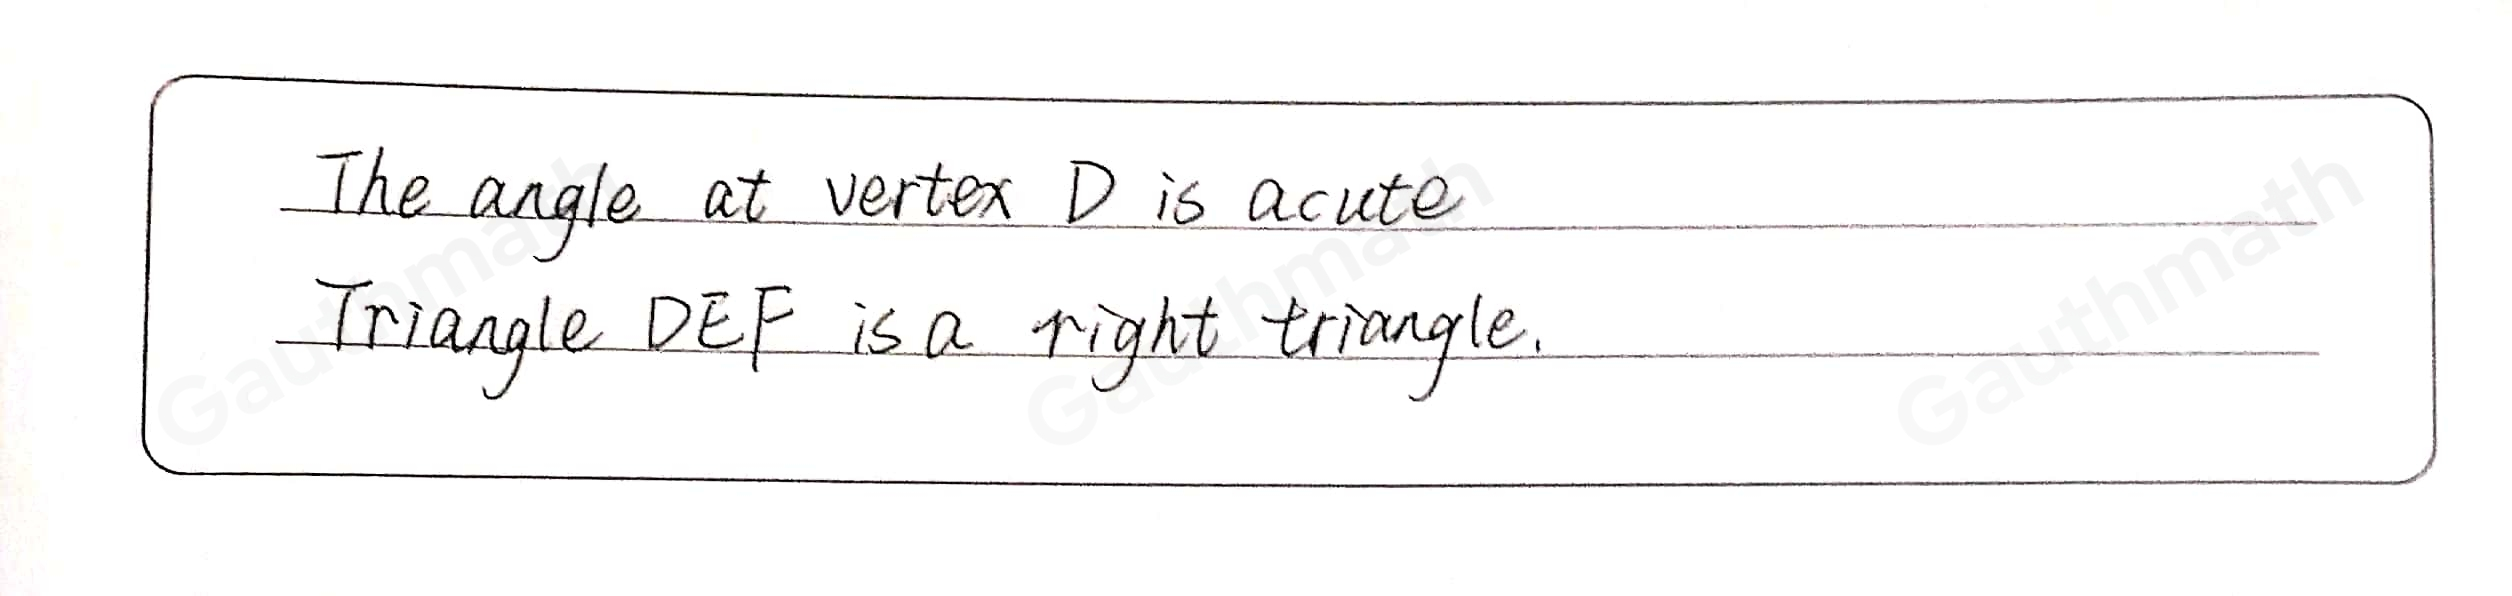 If triangle DEF has a 90 ° angle at vertex E, which statements are true? Select two options. Triangle DEF is an obtuse triangle. The angle at vertex D is acute. The angle at vertex F is obtuse. Triangle DEF is a right triangle. The angle at vertex D is obtuse.